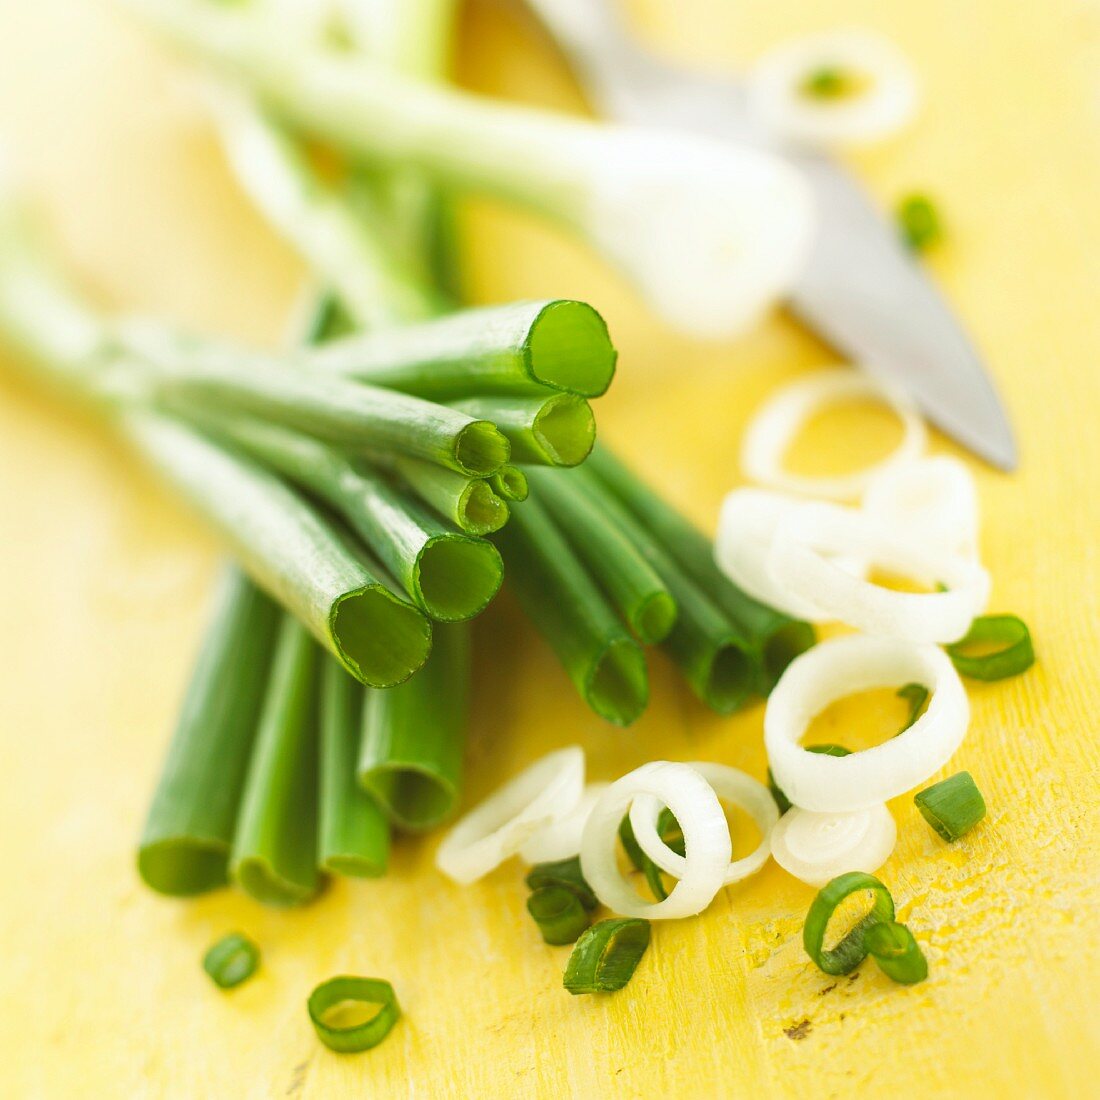 Sliced spring onions (close-up)